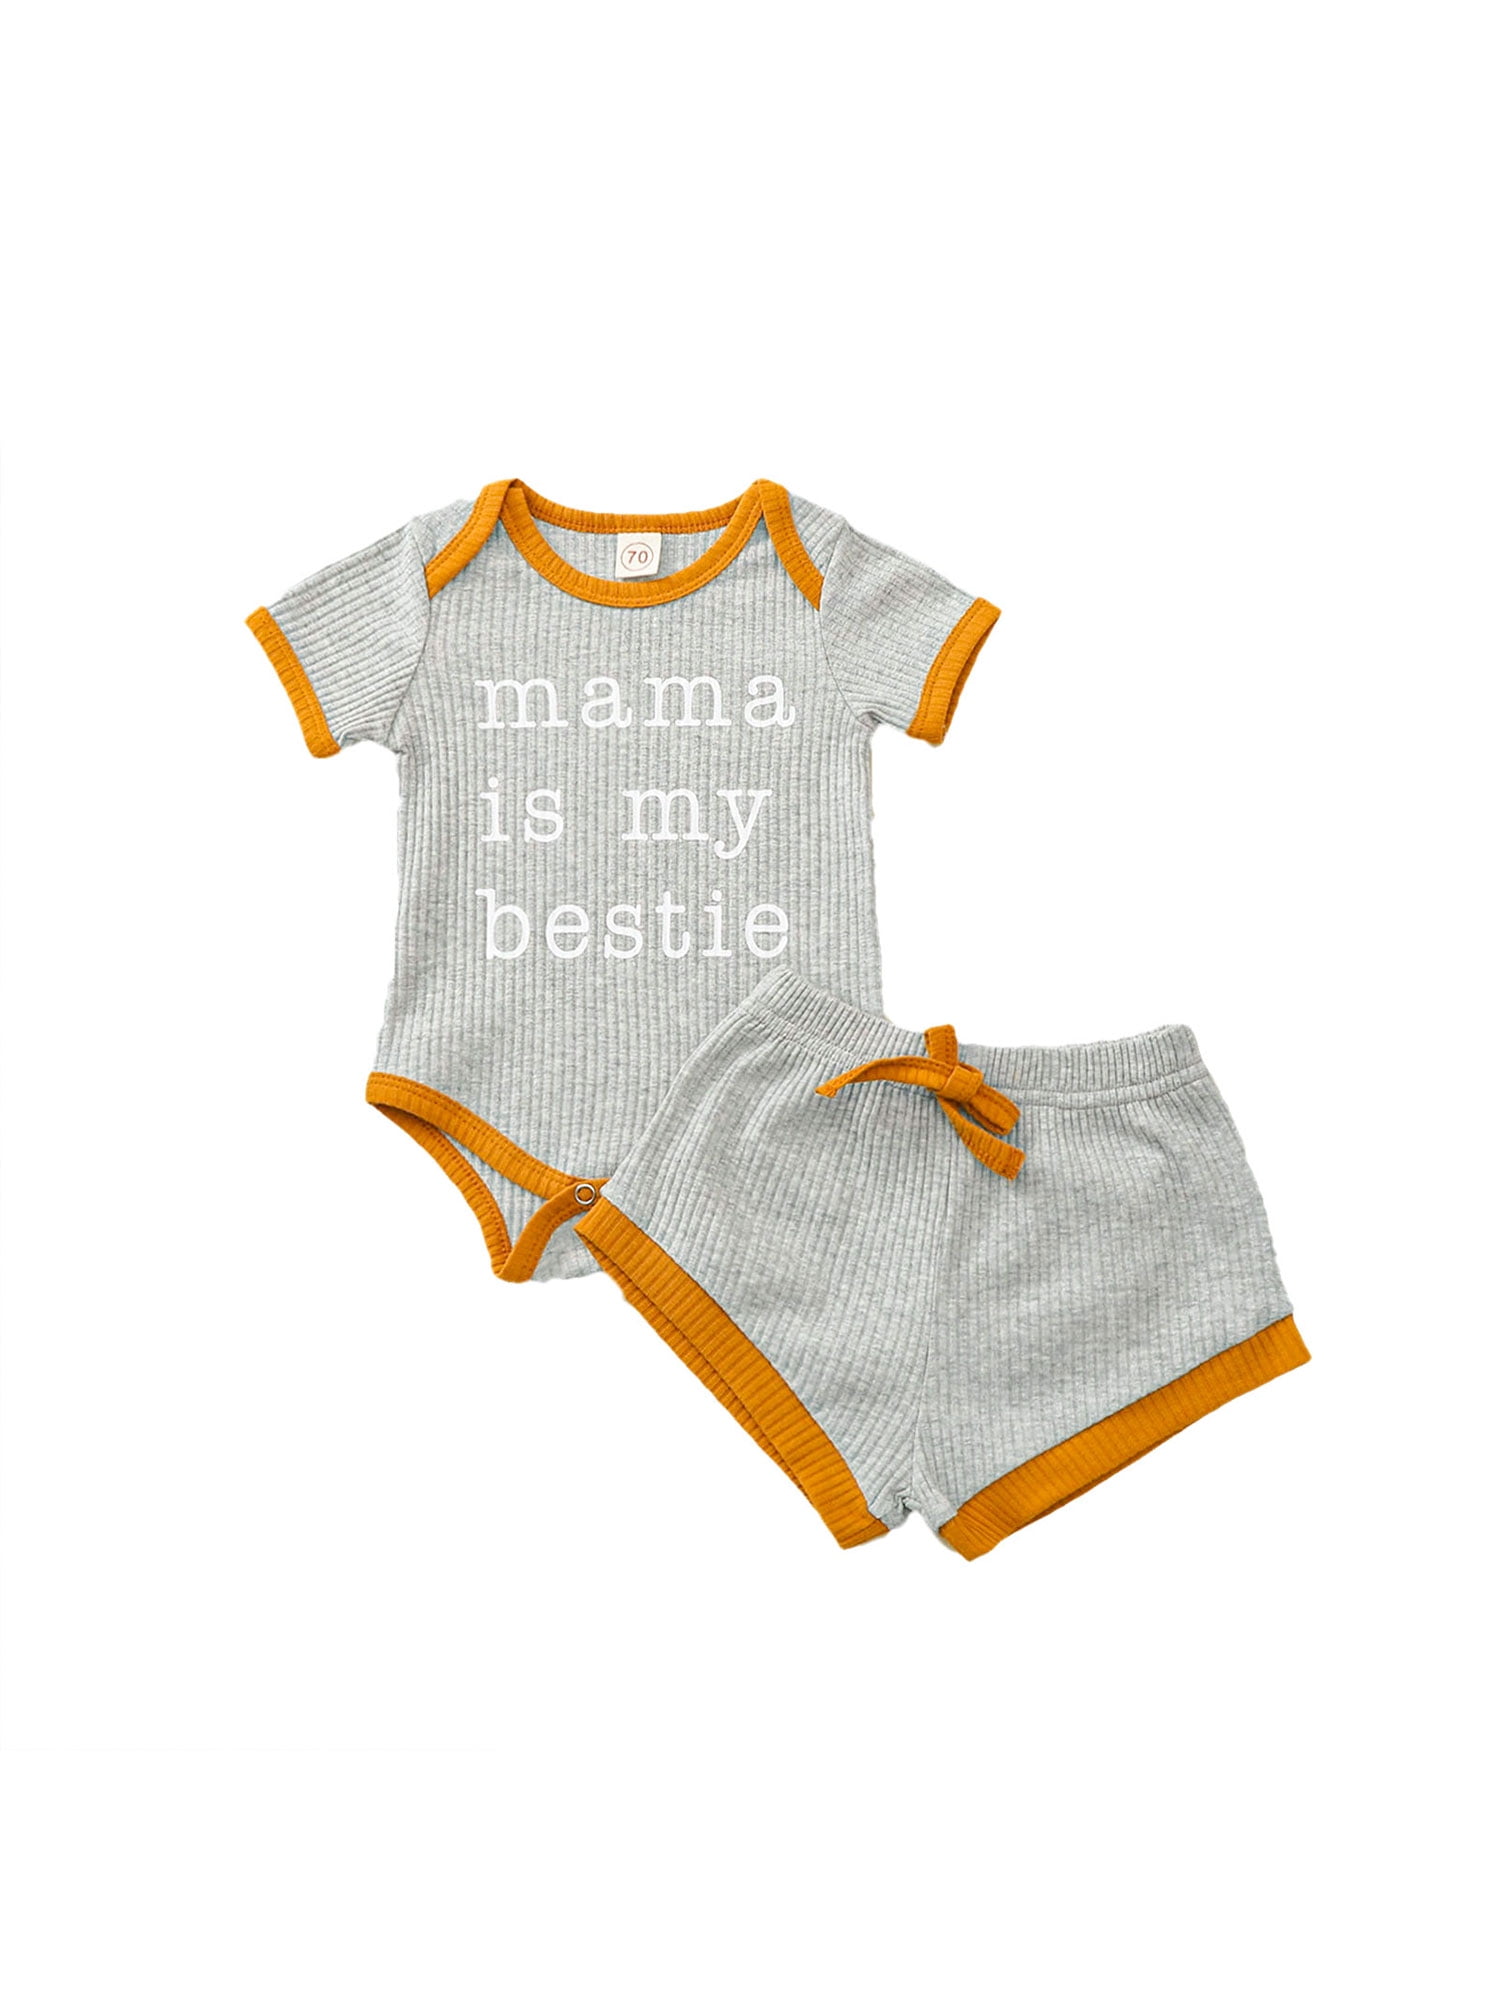 Newborn Baby Boy Girl Scrawl Letter Playsuit Romper Jumpsuit Outfits Clothes Set 